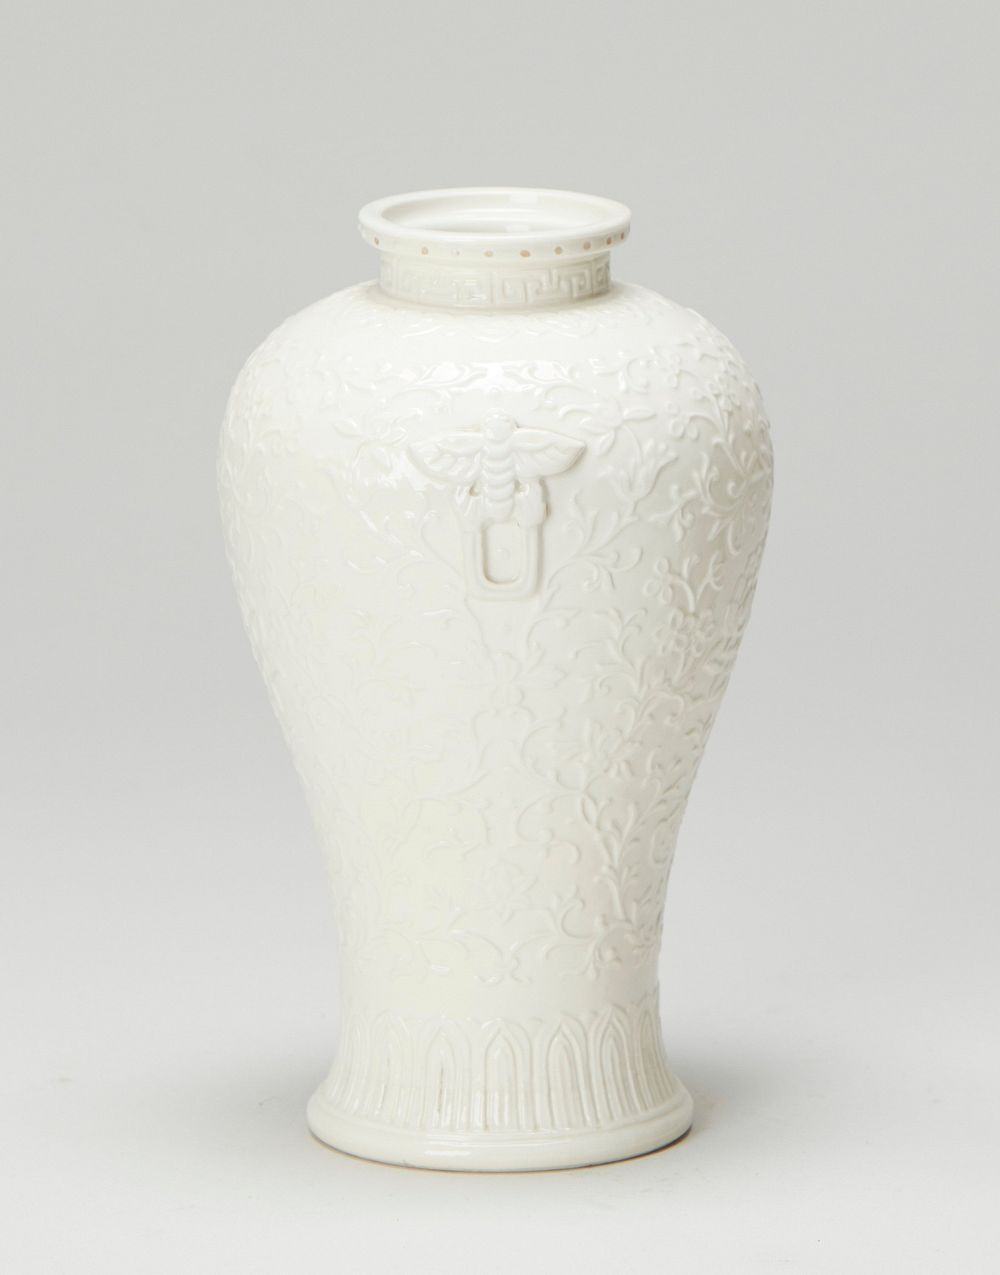 Small, white porcelain; delicate surface decoration of floral motif.. Original from the Minneapolis Institute of Art.